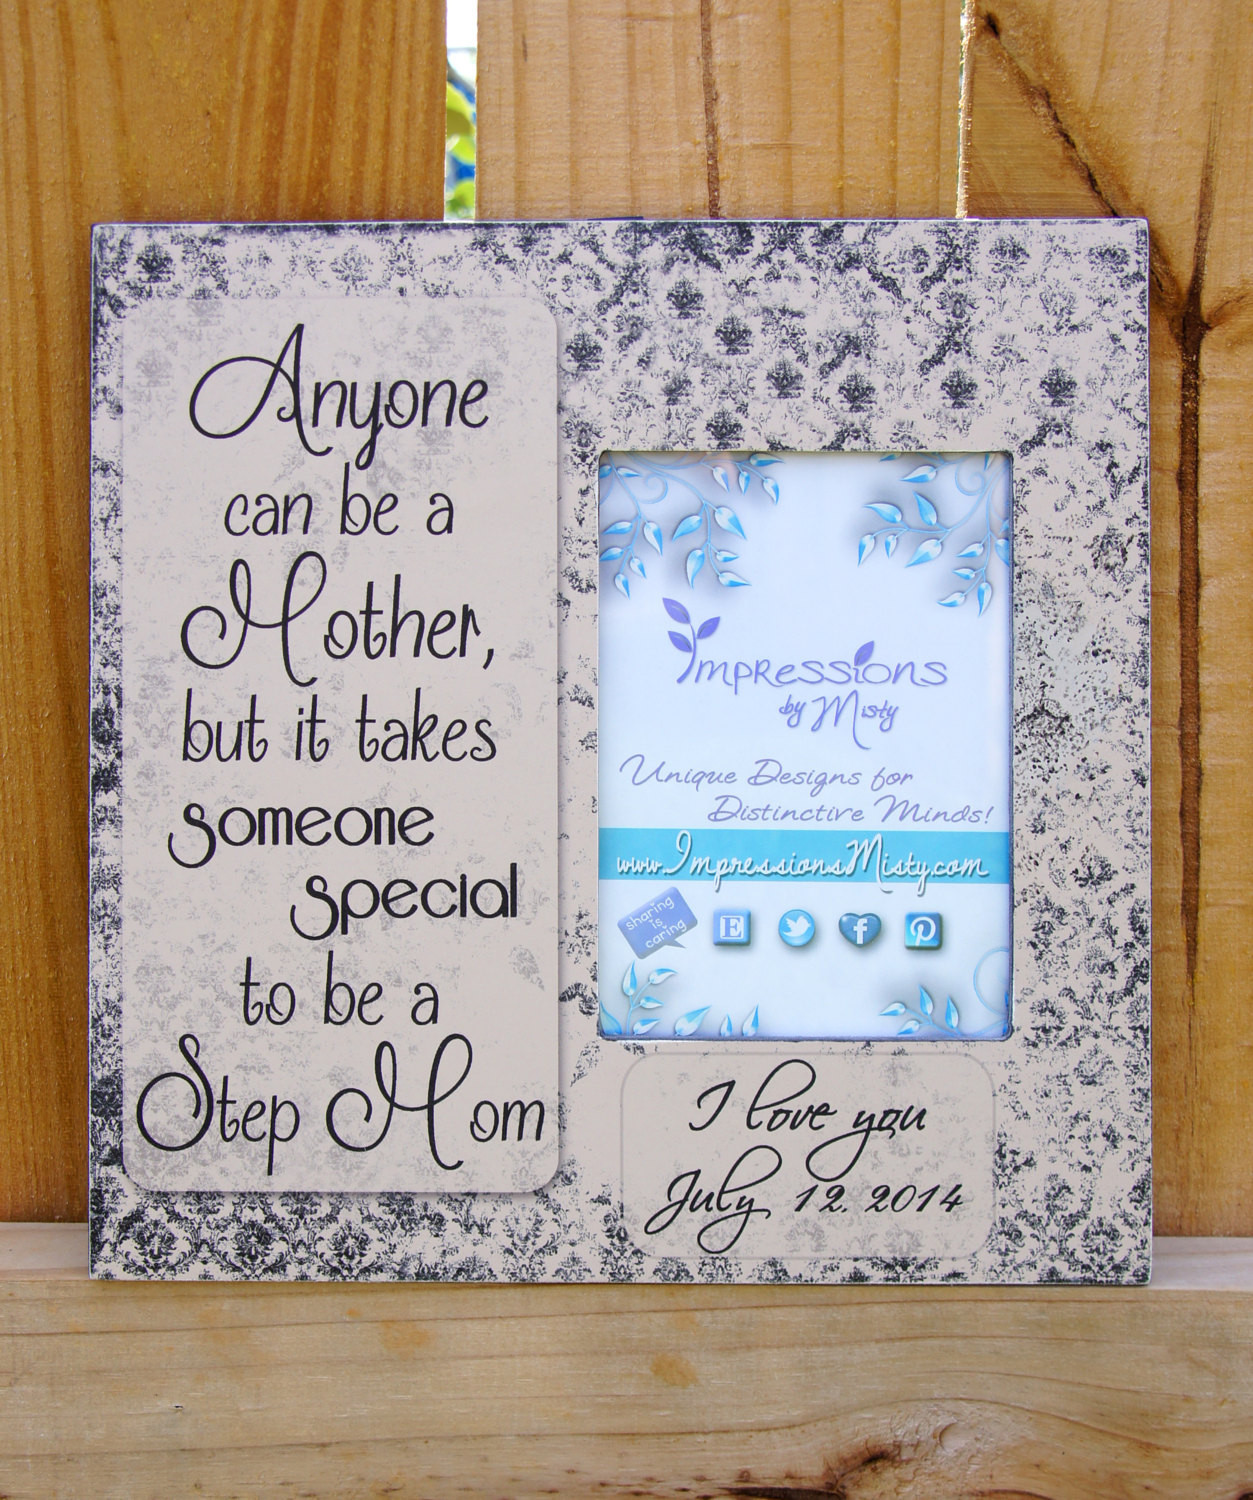 Birthday Gift Ideas For Stepmom
 Personalized Step Mom Gift Mother of the by ImpressionsByMisty